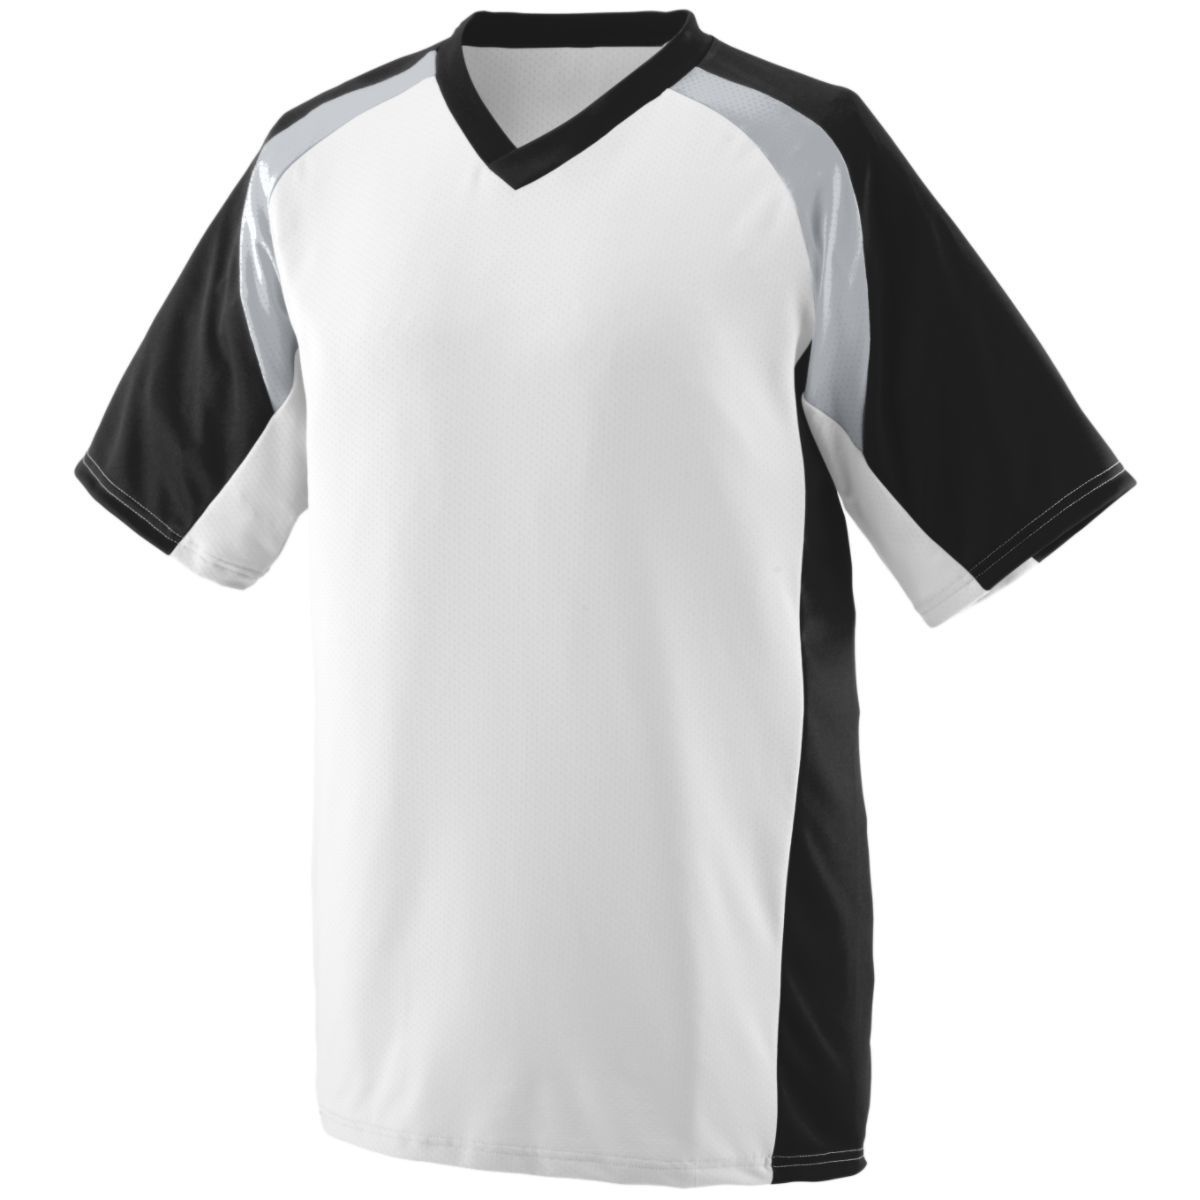 Augusta Sportswear Youth Nitro Jersey in White/Black/Silver Grey  -Part of the Youth, Youth-Jersey, Augusta-Products, Football, Shirts, All-Sports, All-Sports-1 product lines at KanaleyCreations.com